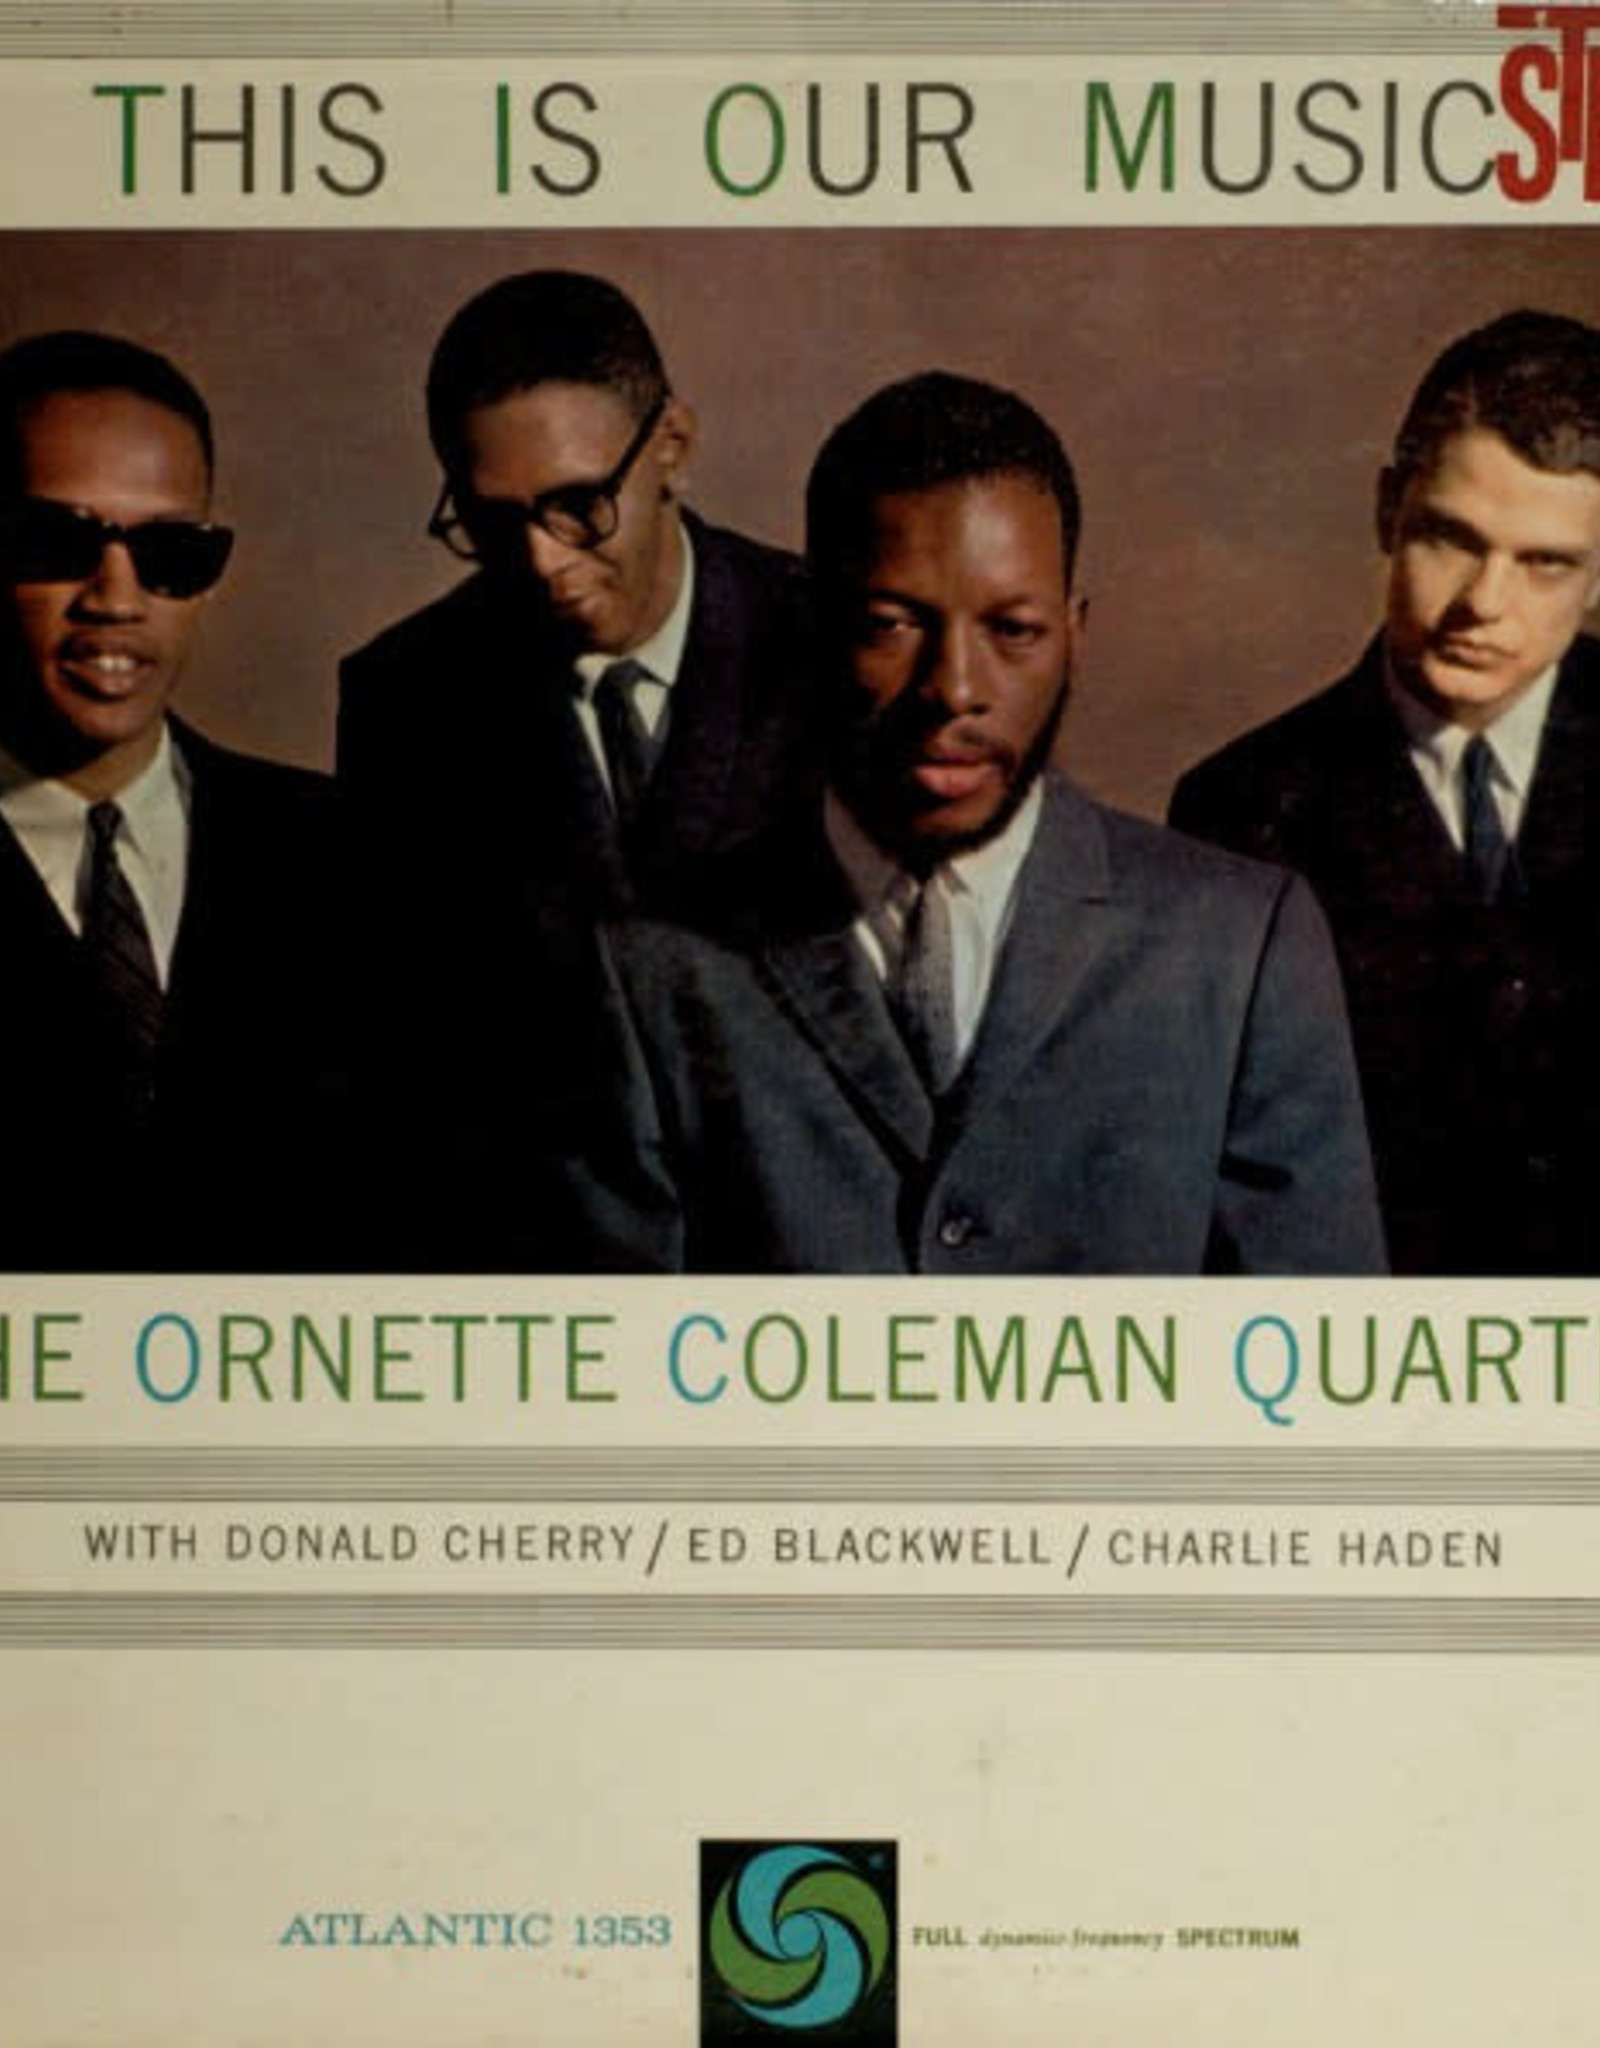 Ornette Coleman - This is Our Music